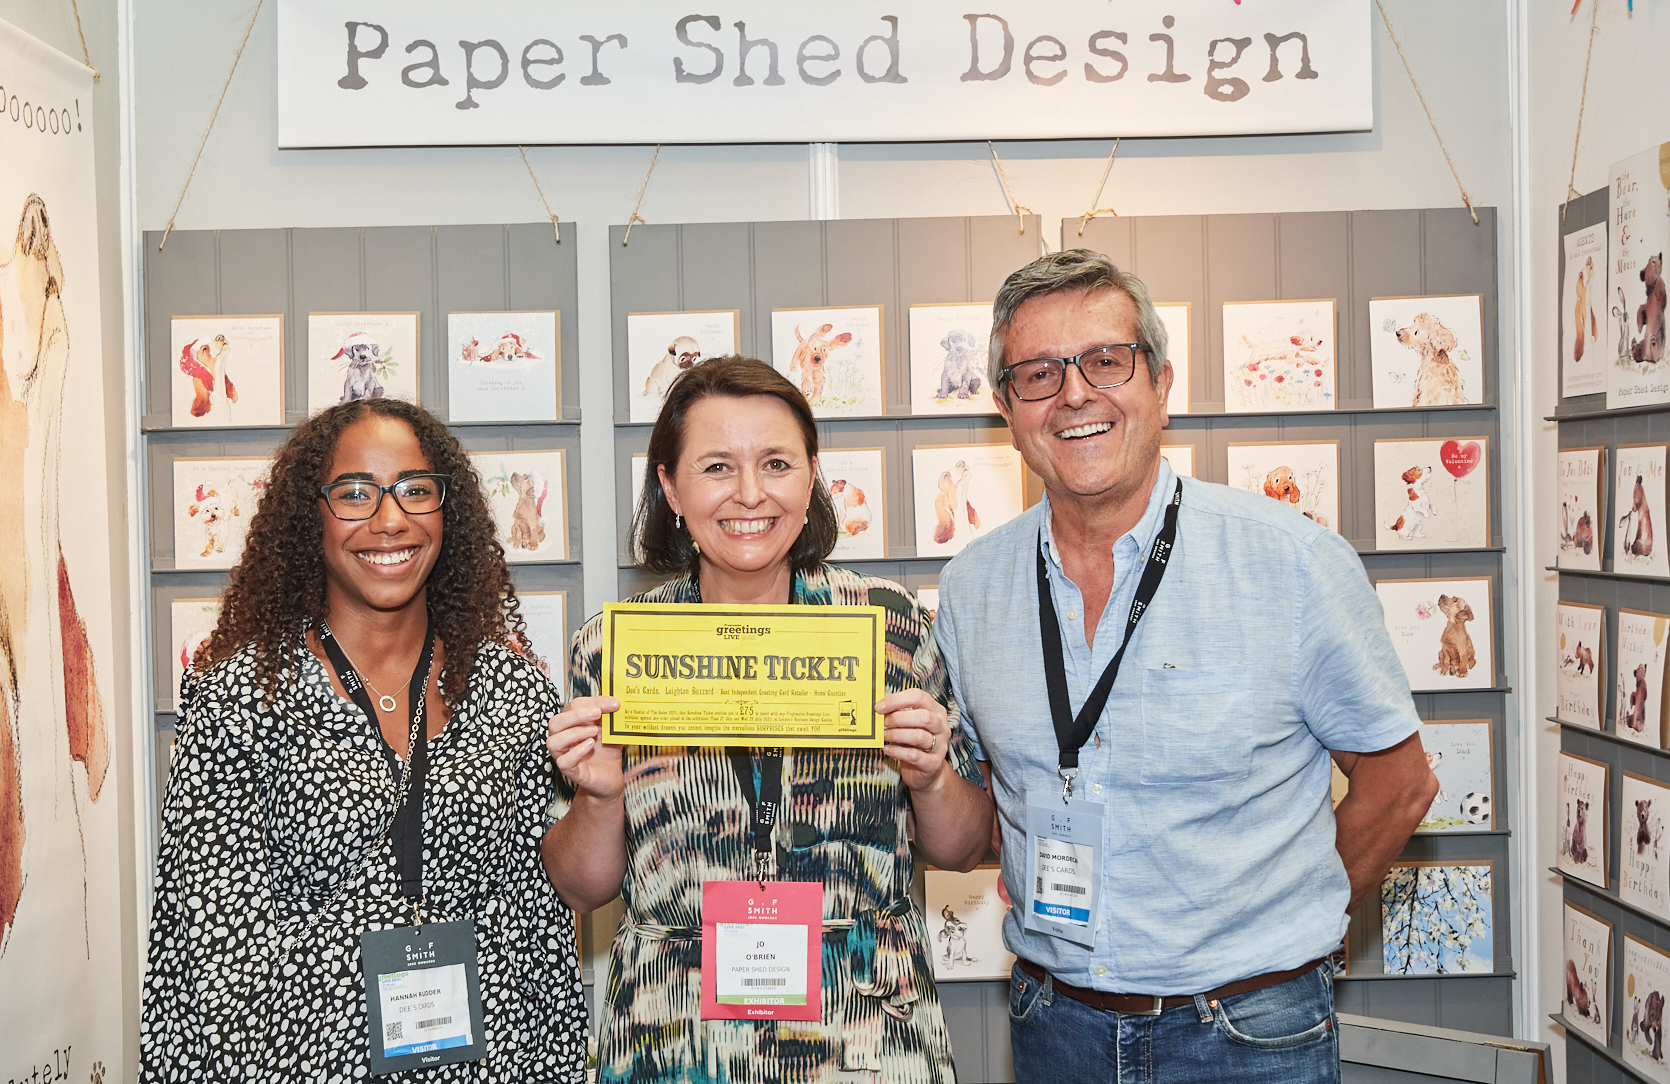 Above: Having debuted at PG Live this year, Paper Shed Designs is getting ready to rock at the 2022 show. Founder Jo O’Brien (centre) with Dees Cards’ Hannah Rudder and Paul Mordecai.